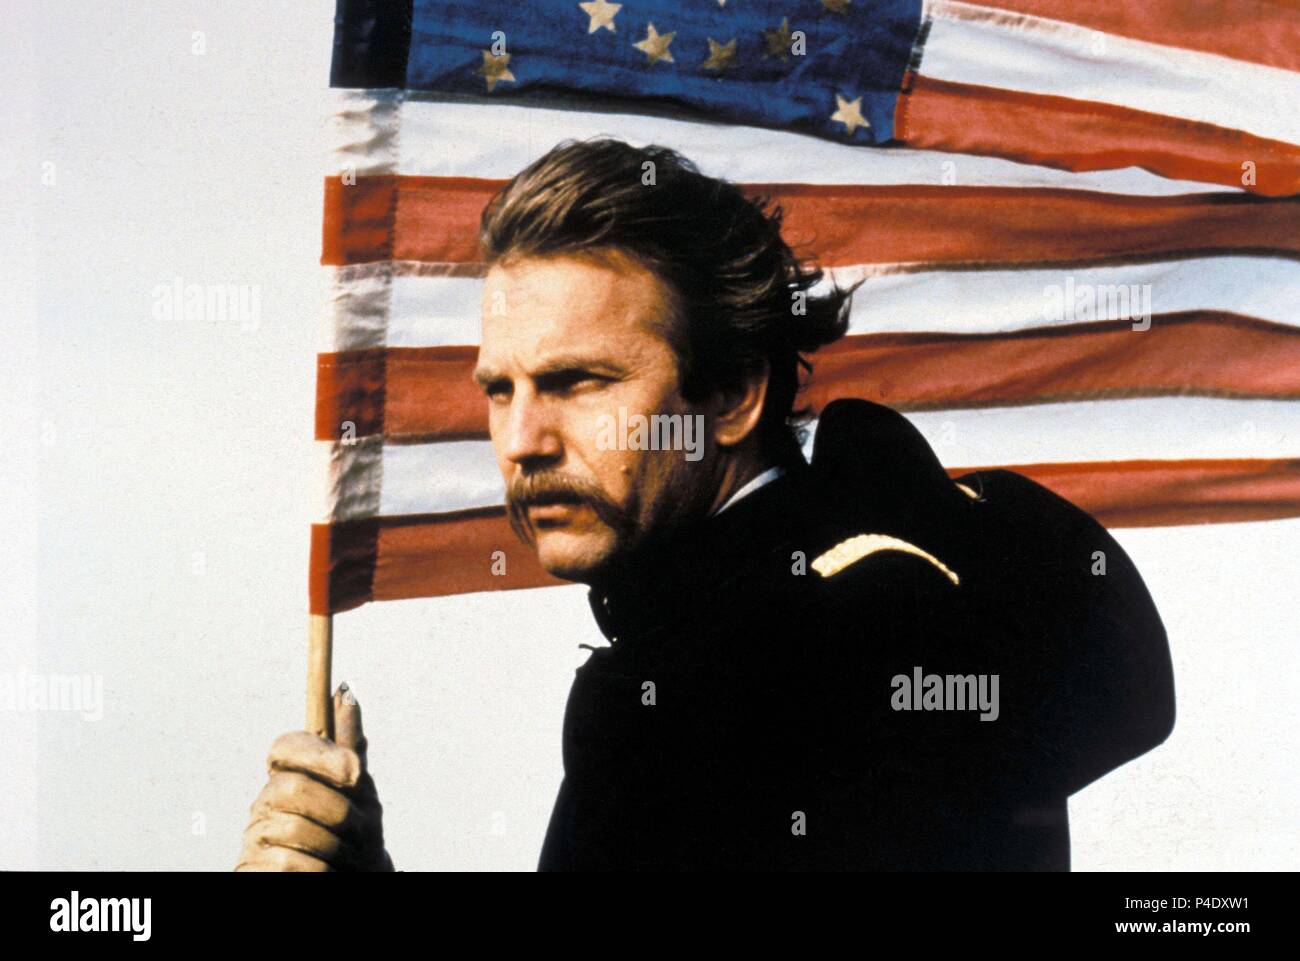 Original Film Title: DANCES WITH WOLVES.  English Title: DANCES WITH WOLVES.  Film Director: KEVIN COSTNER.  Year: 1990.  Stars: KEVIN COSTNER. Credit: ORION PICTURES / Album Stock Photo